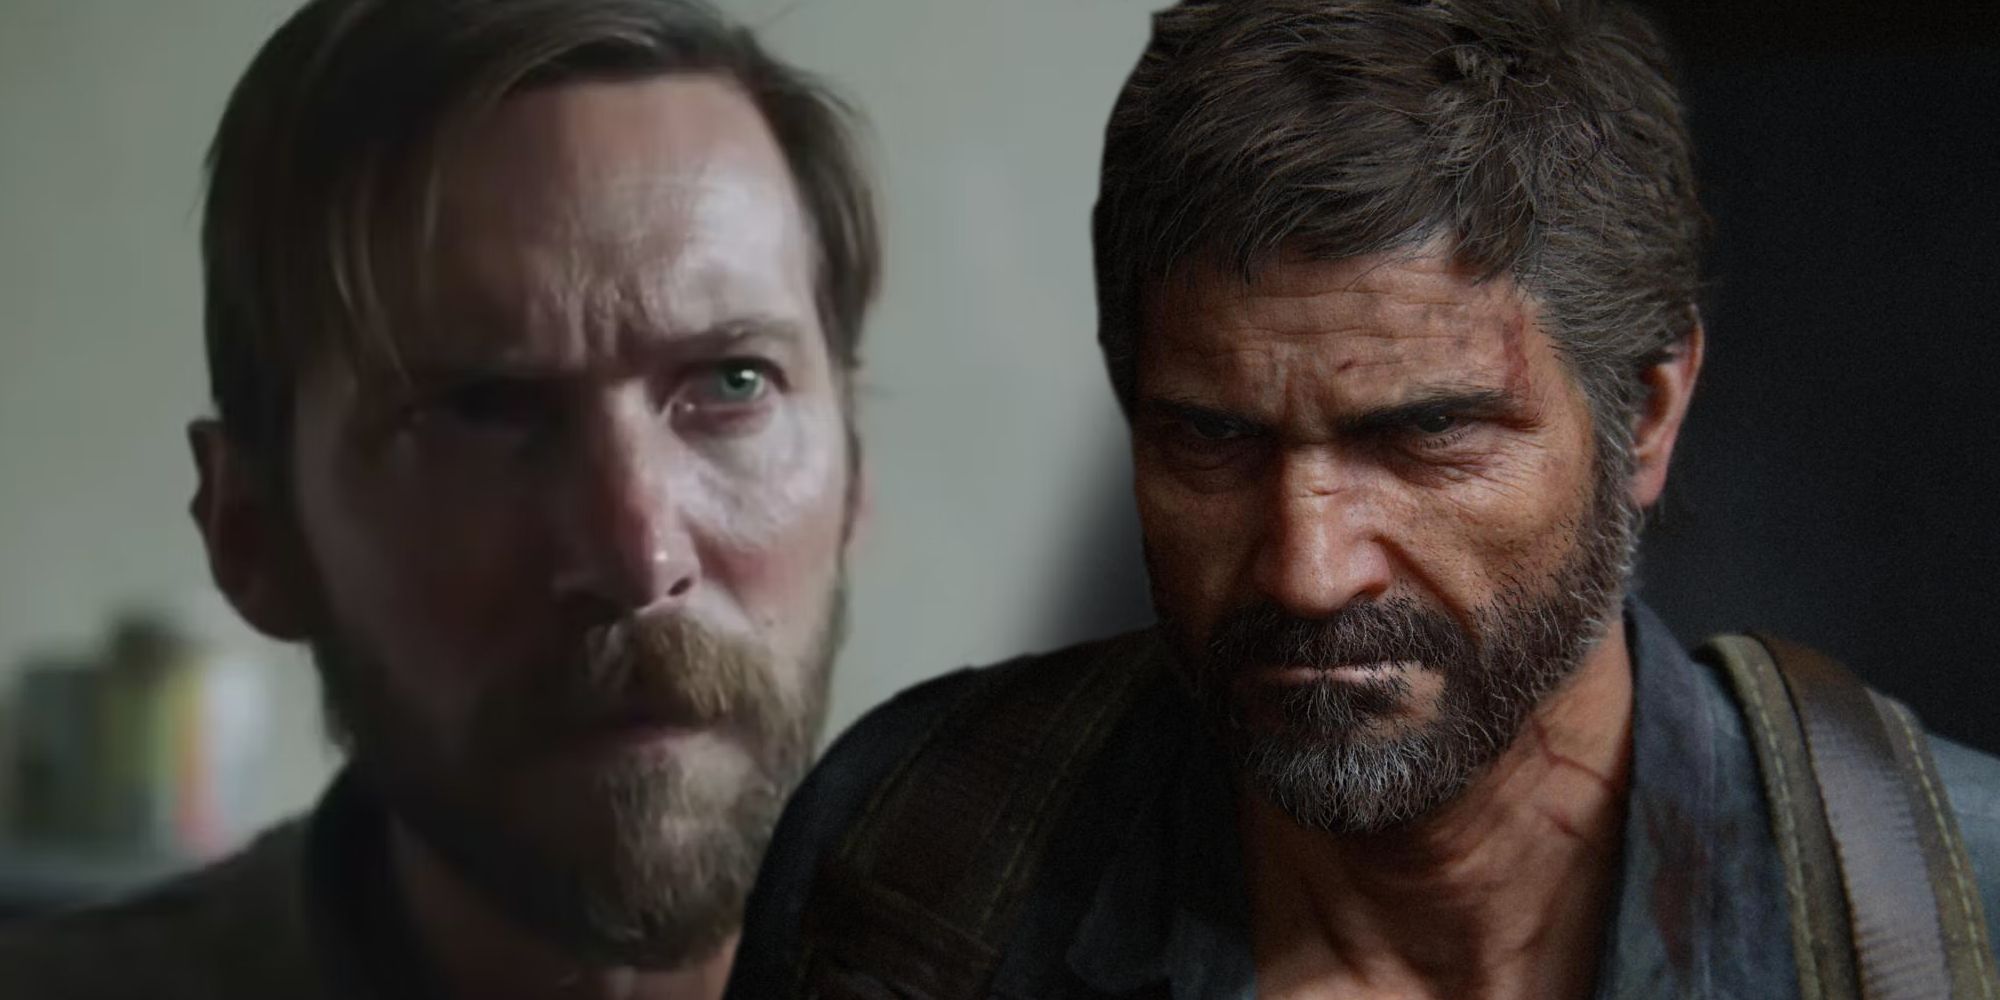 Troy Baker next to Joel's character model from The Last of Us Part II